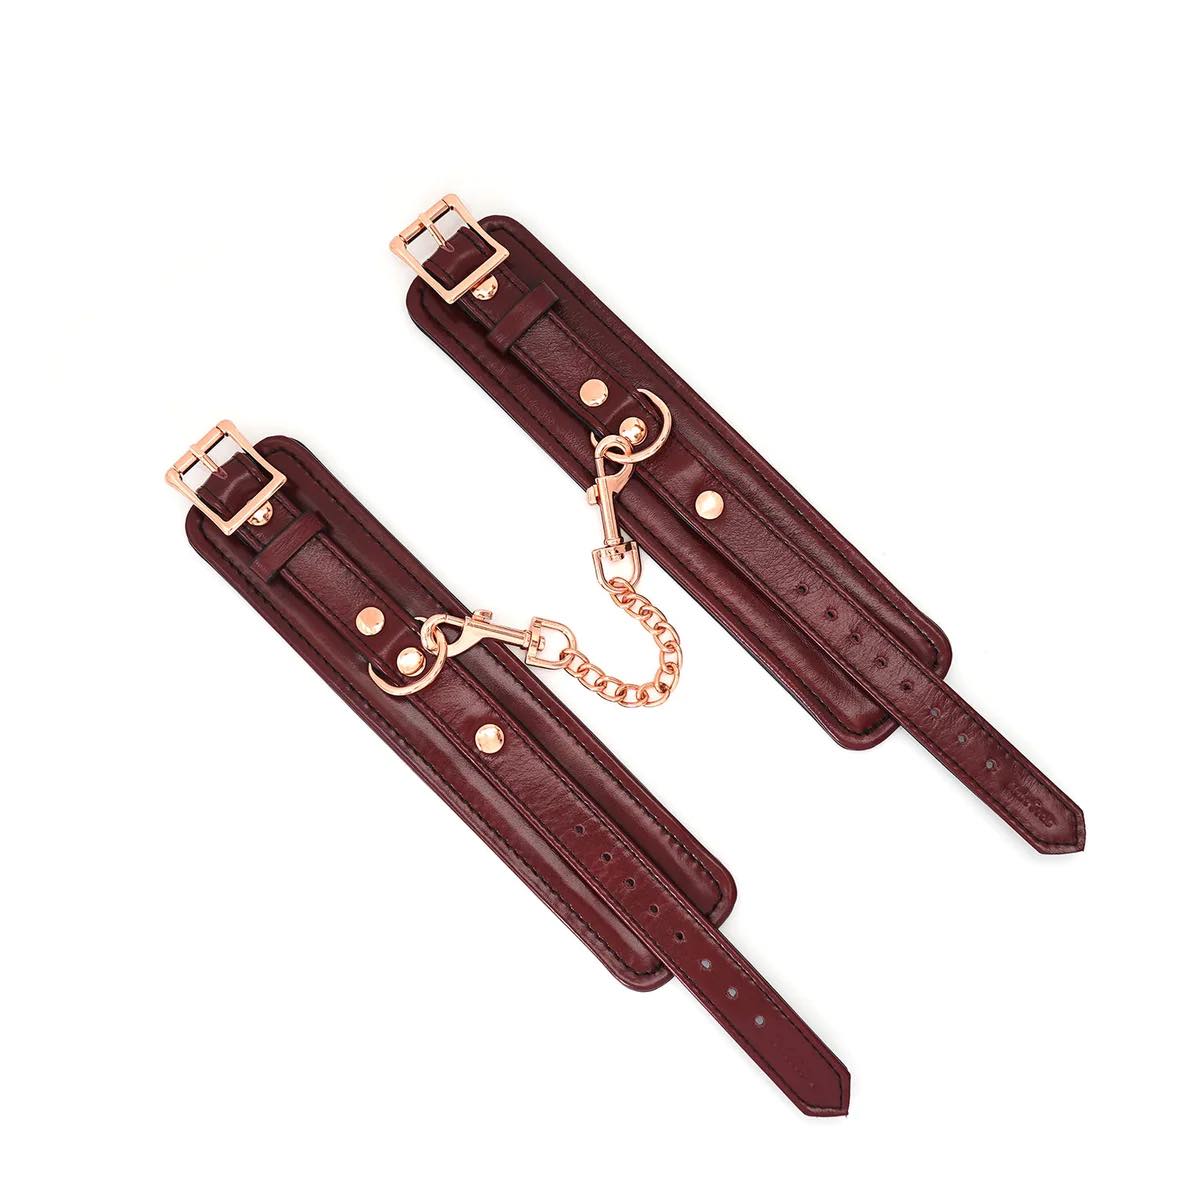 The Burgundy Leather Cuffs with Rose Gold Hardware laid flat next to each other.